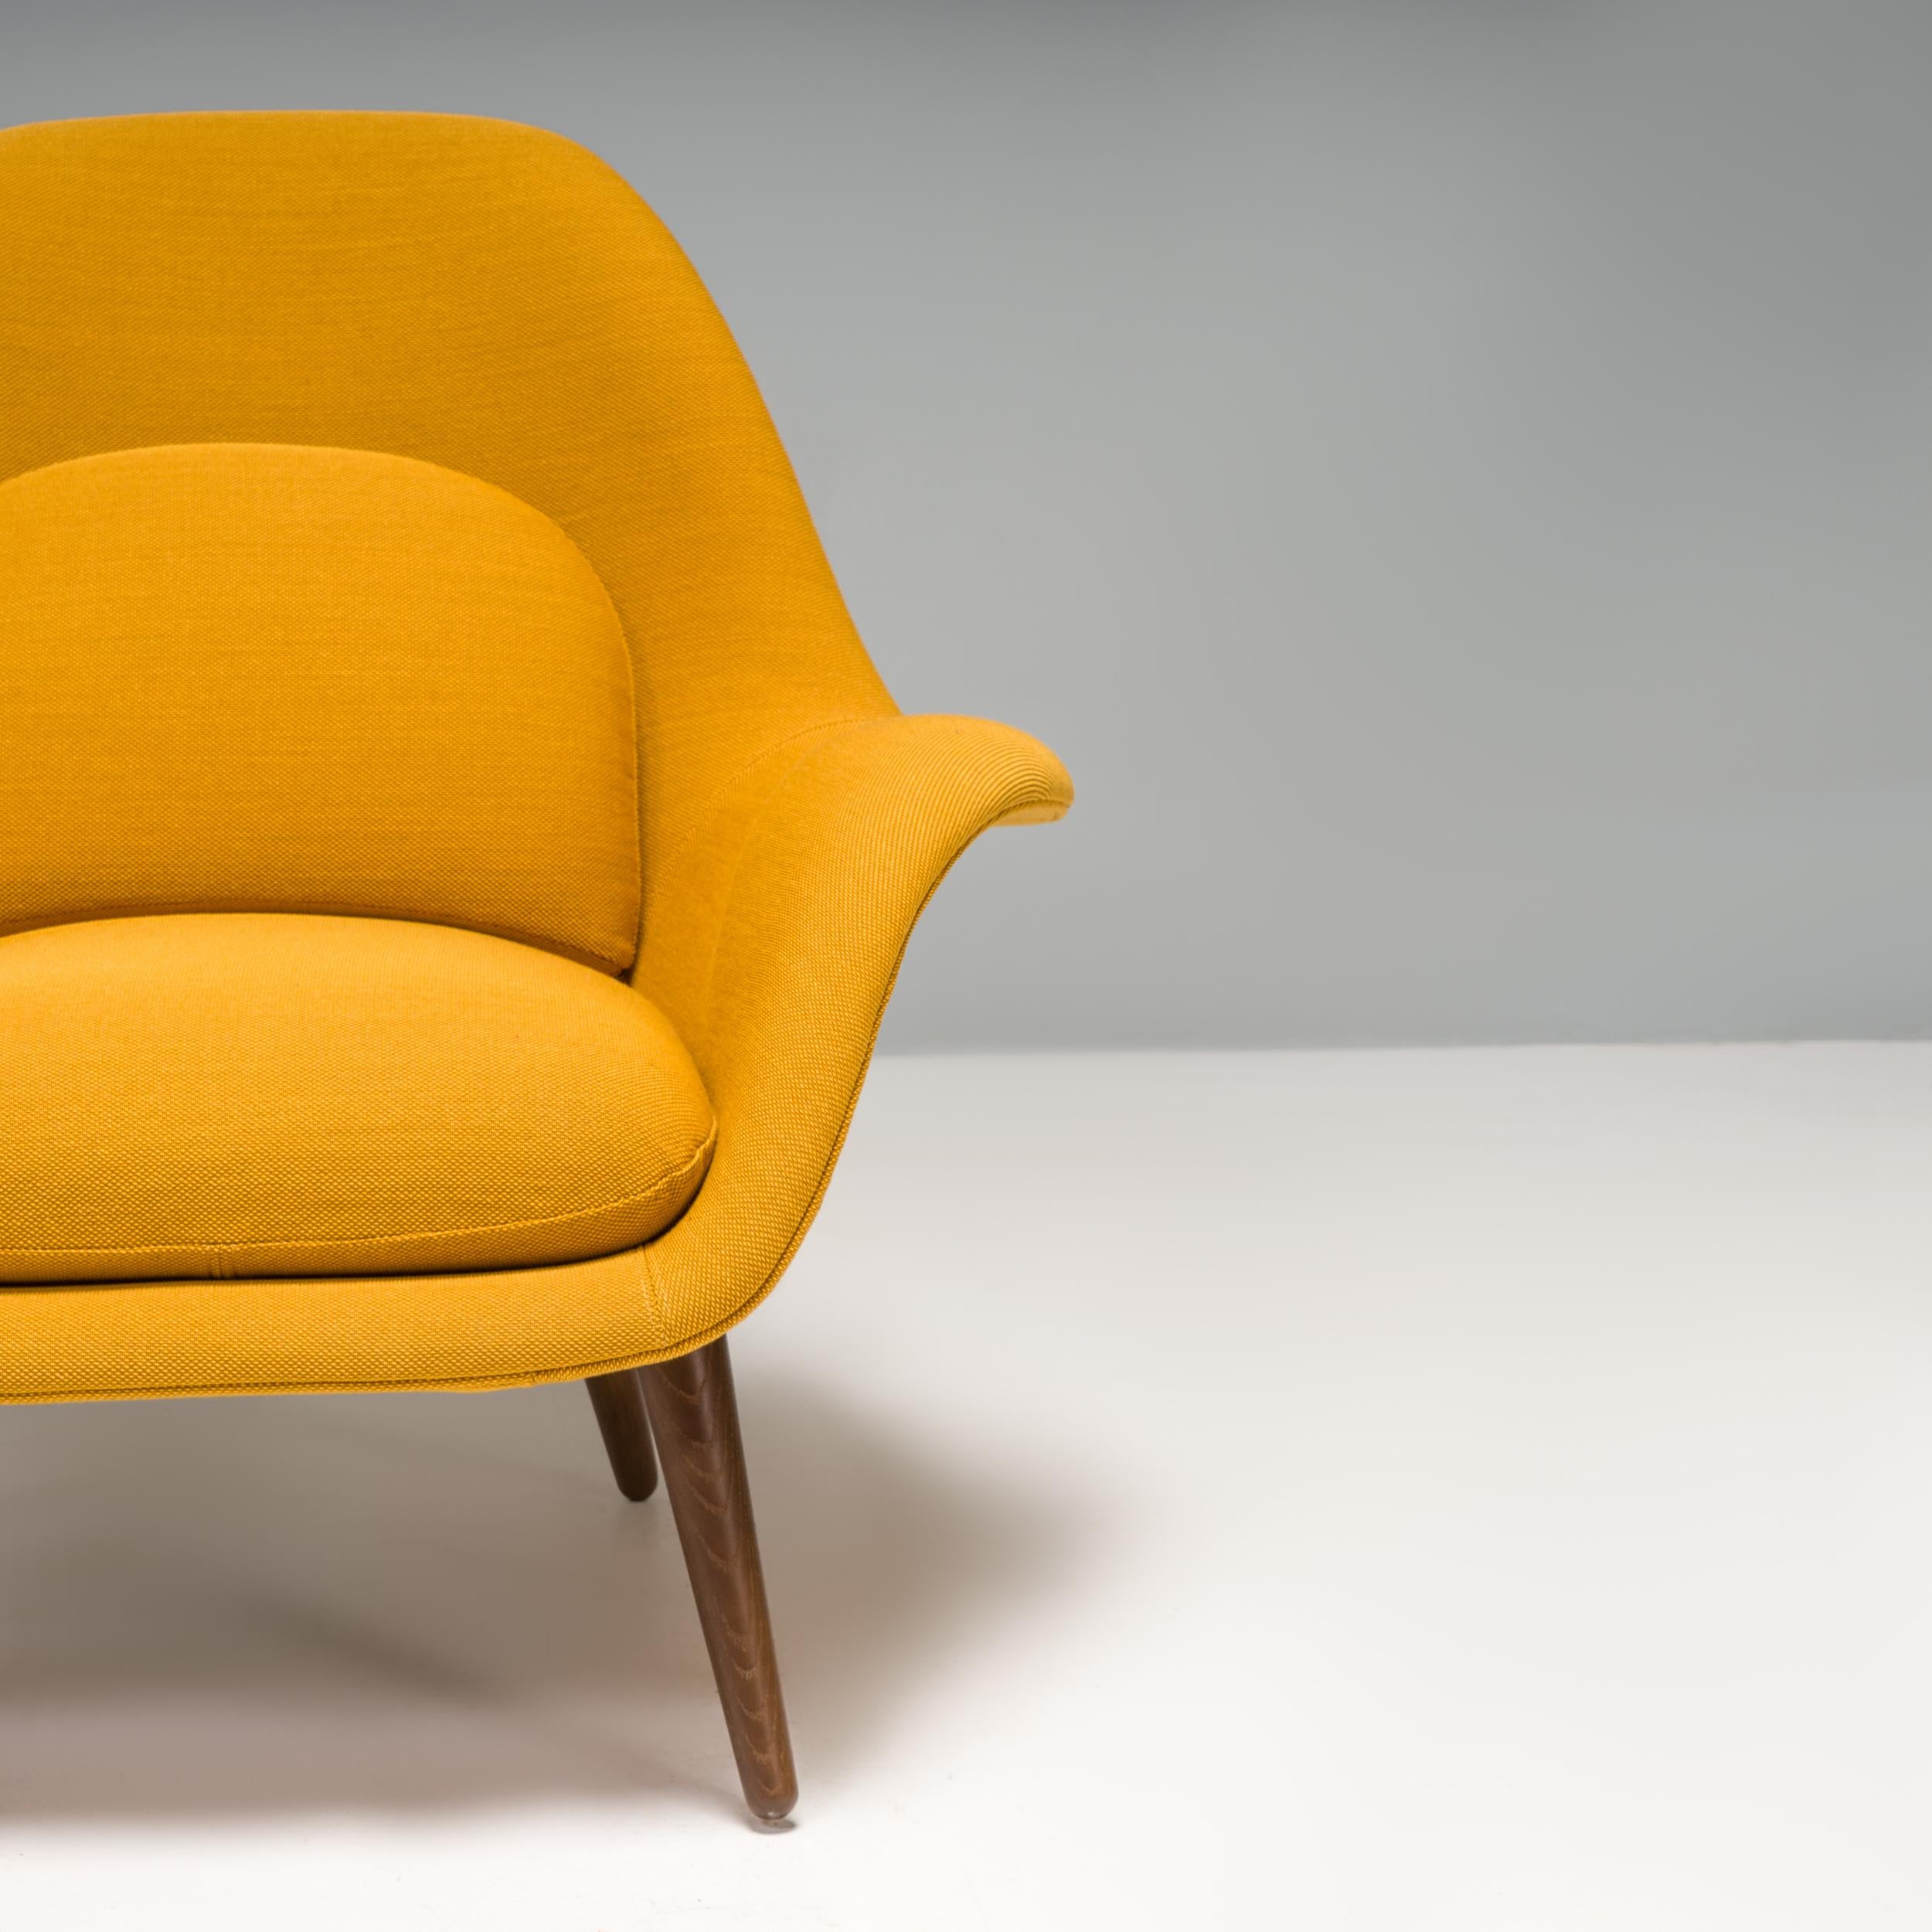 Space Copenhagen for Fredericia Mustard Yellow Swoon Lounge Armchairs, Set of 2 10